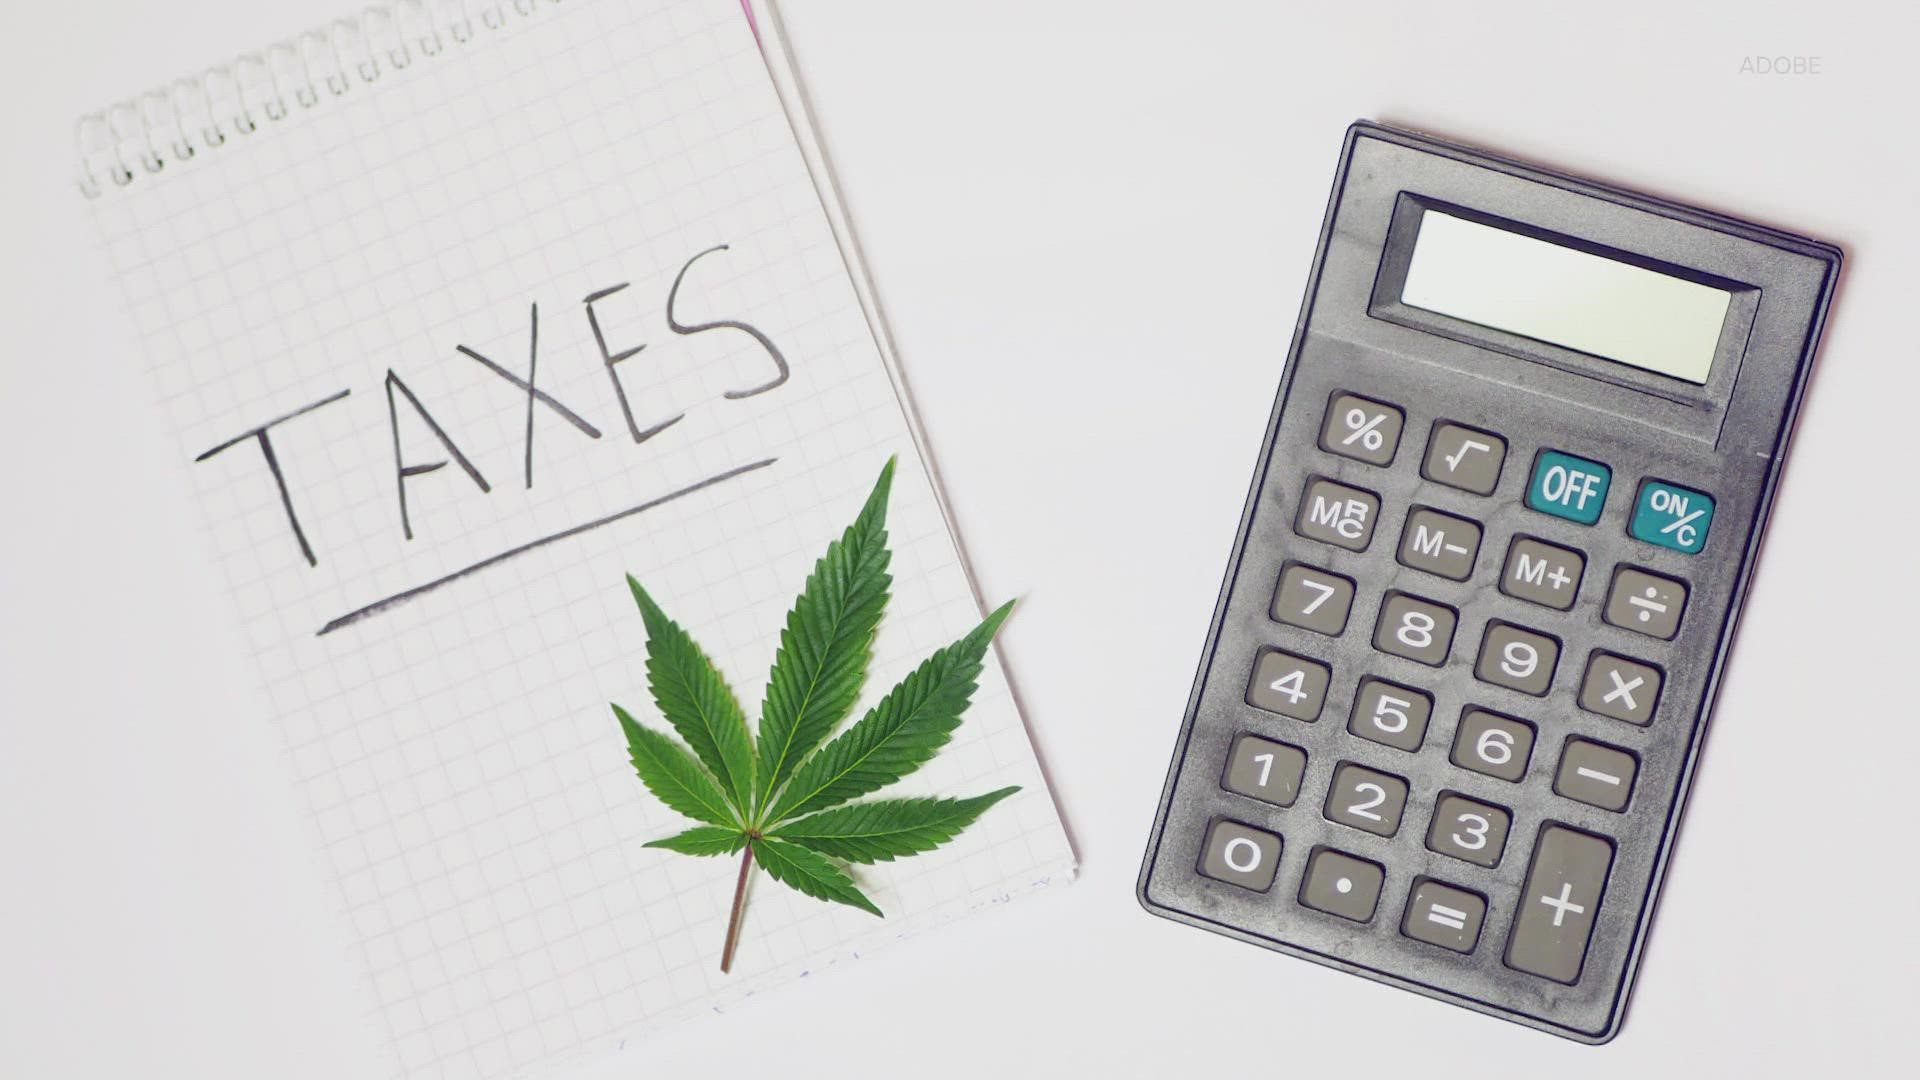 OSPI receives about $520,000 a year from marijuana tax revenue, however the taxes were not originally earmarked to go toward education.